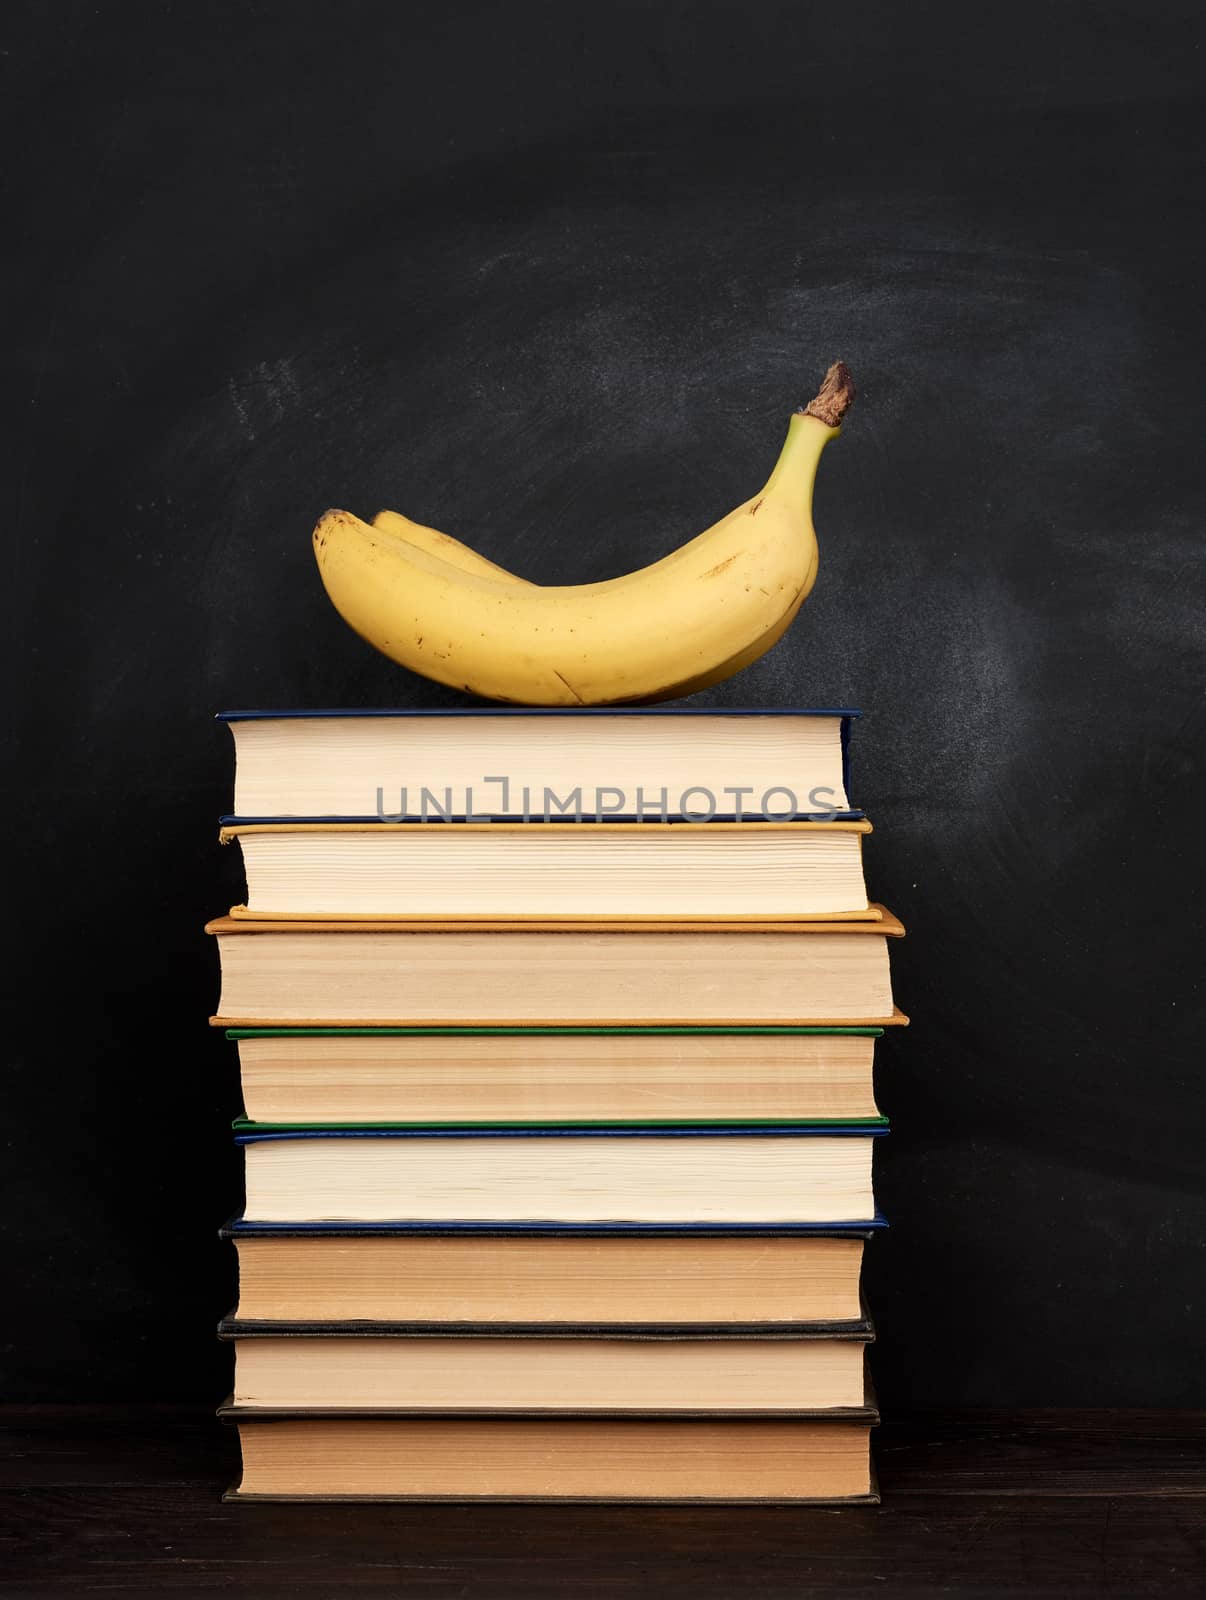 yellow ripe banana and stack of various hardback books on the background of an empty black chalk board, back to school